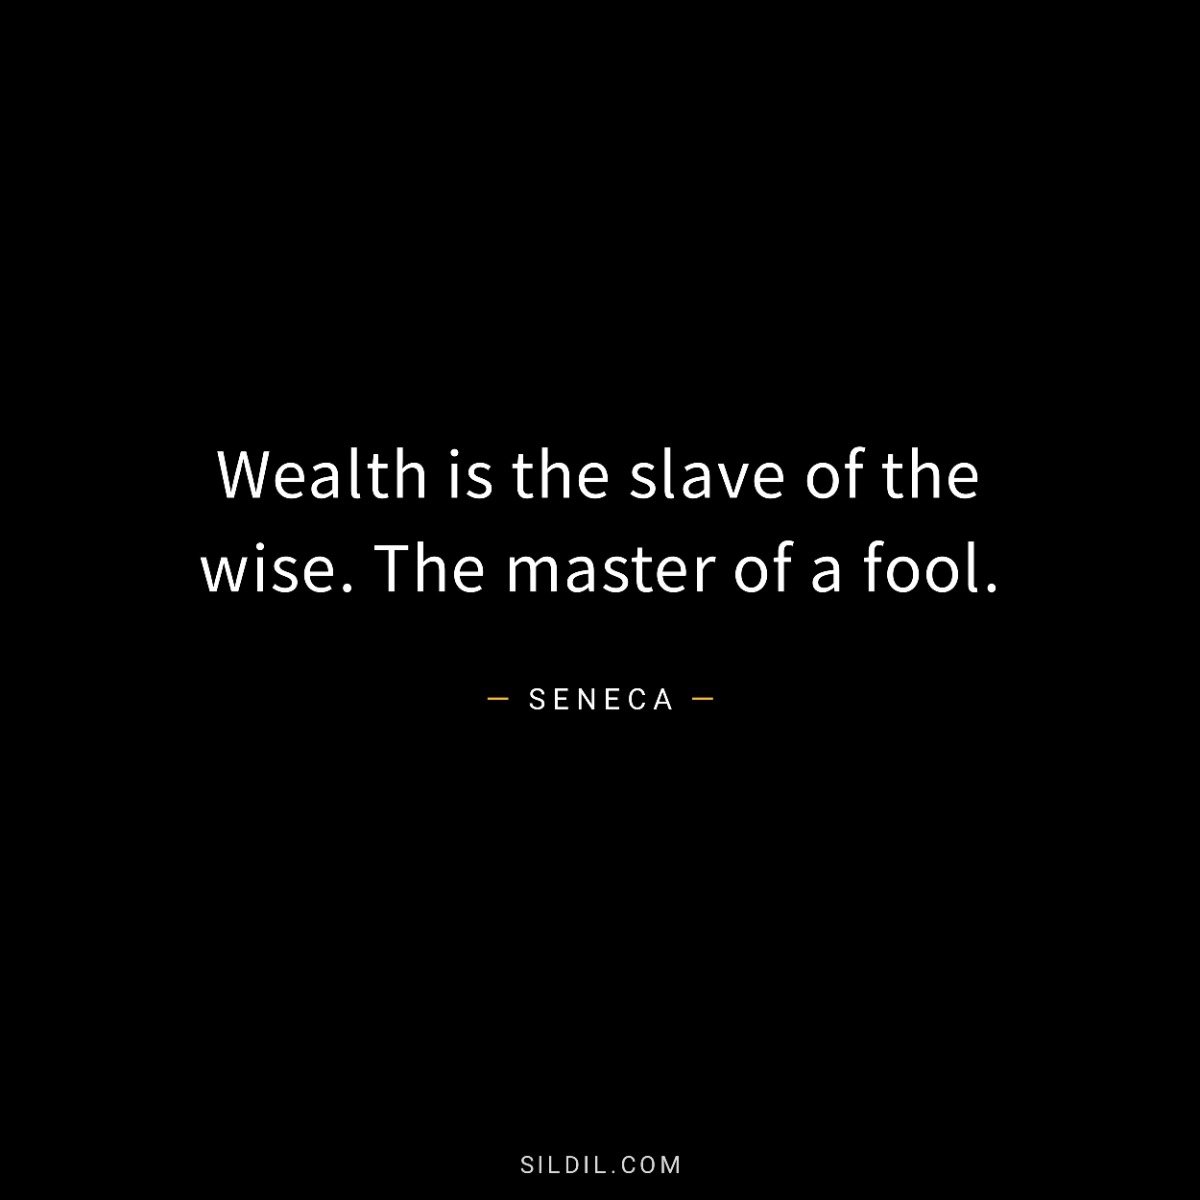 Wealth is the slave of the wise. The master of a fool.